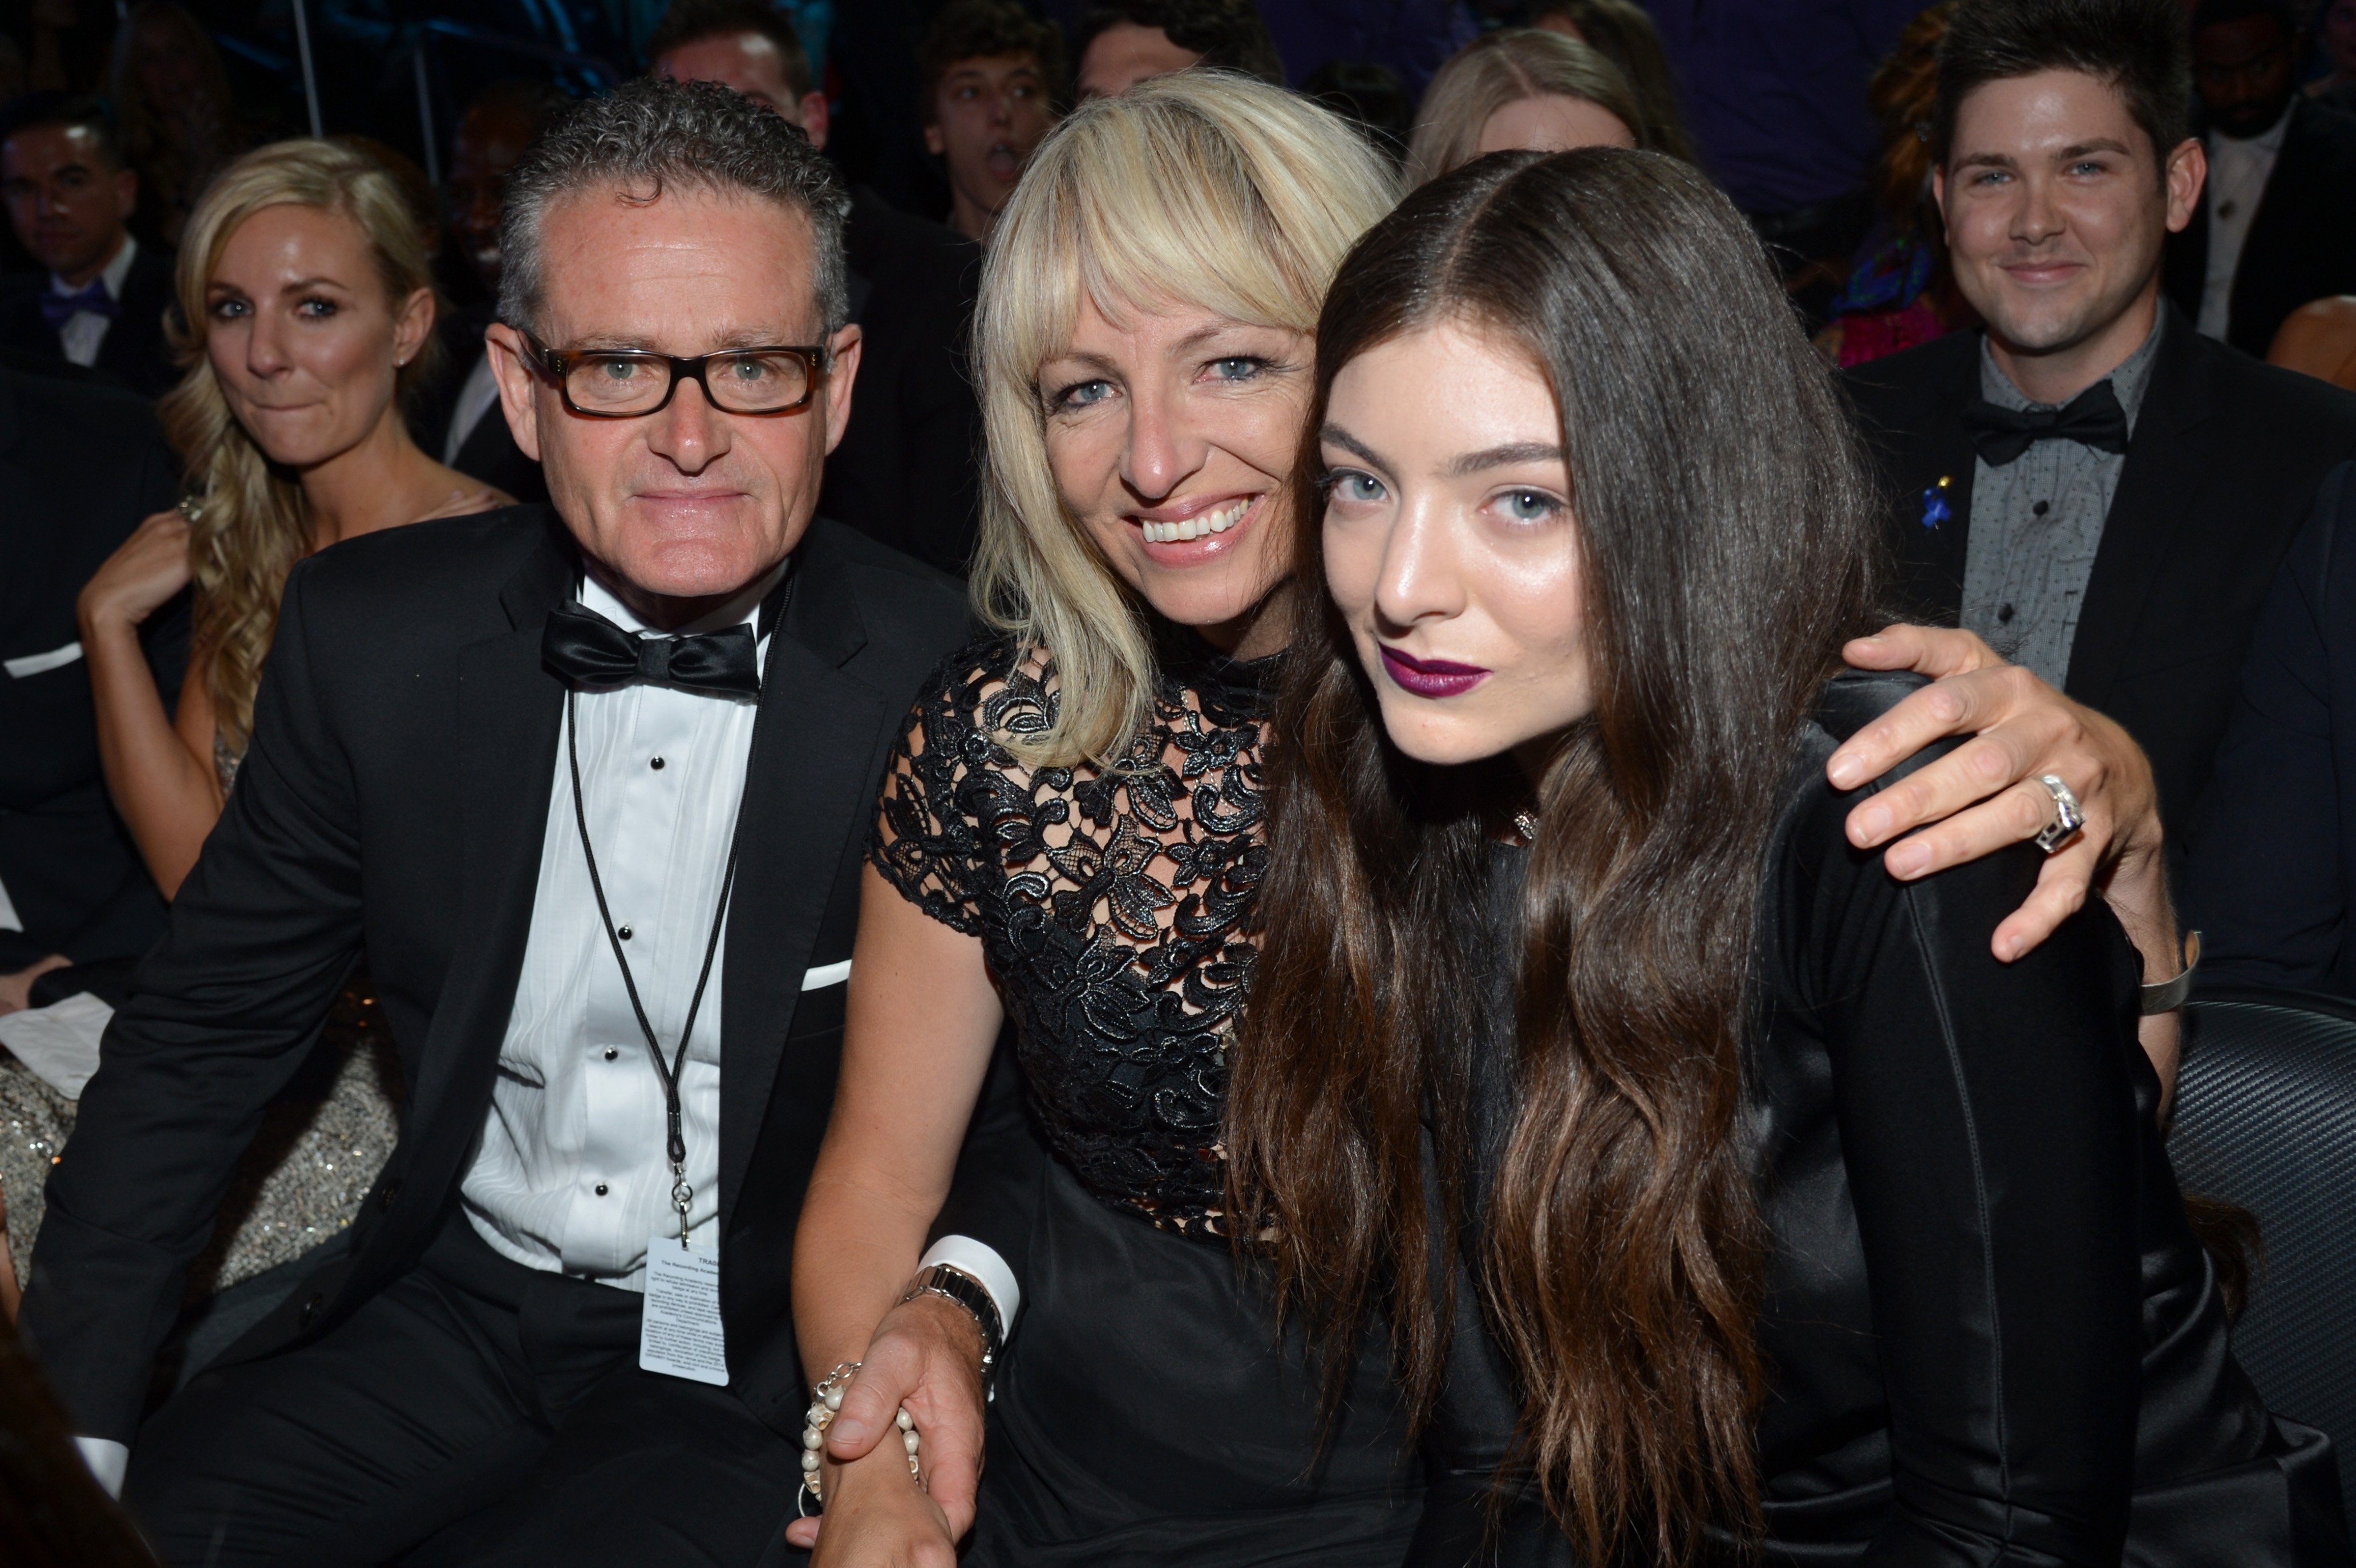  Vic O'Connor, Sonja Yelich and recording artist Lorde attend the 56th GRAMMY Awards at Staples Center on January 26, 2014 in Los Angeles, California. | Source Getty Images